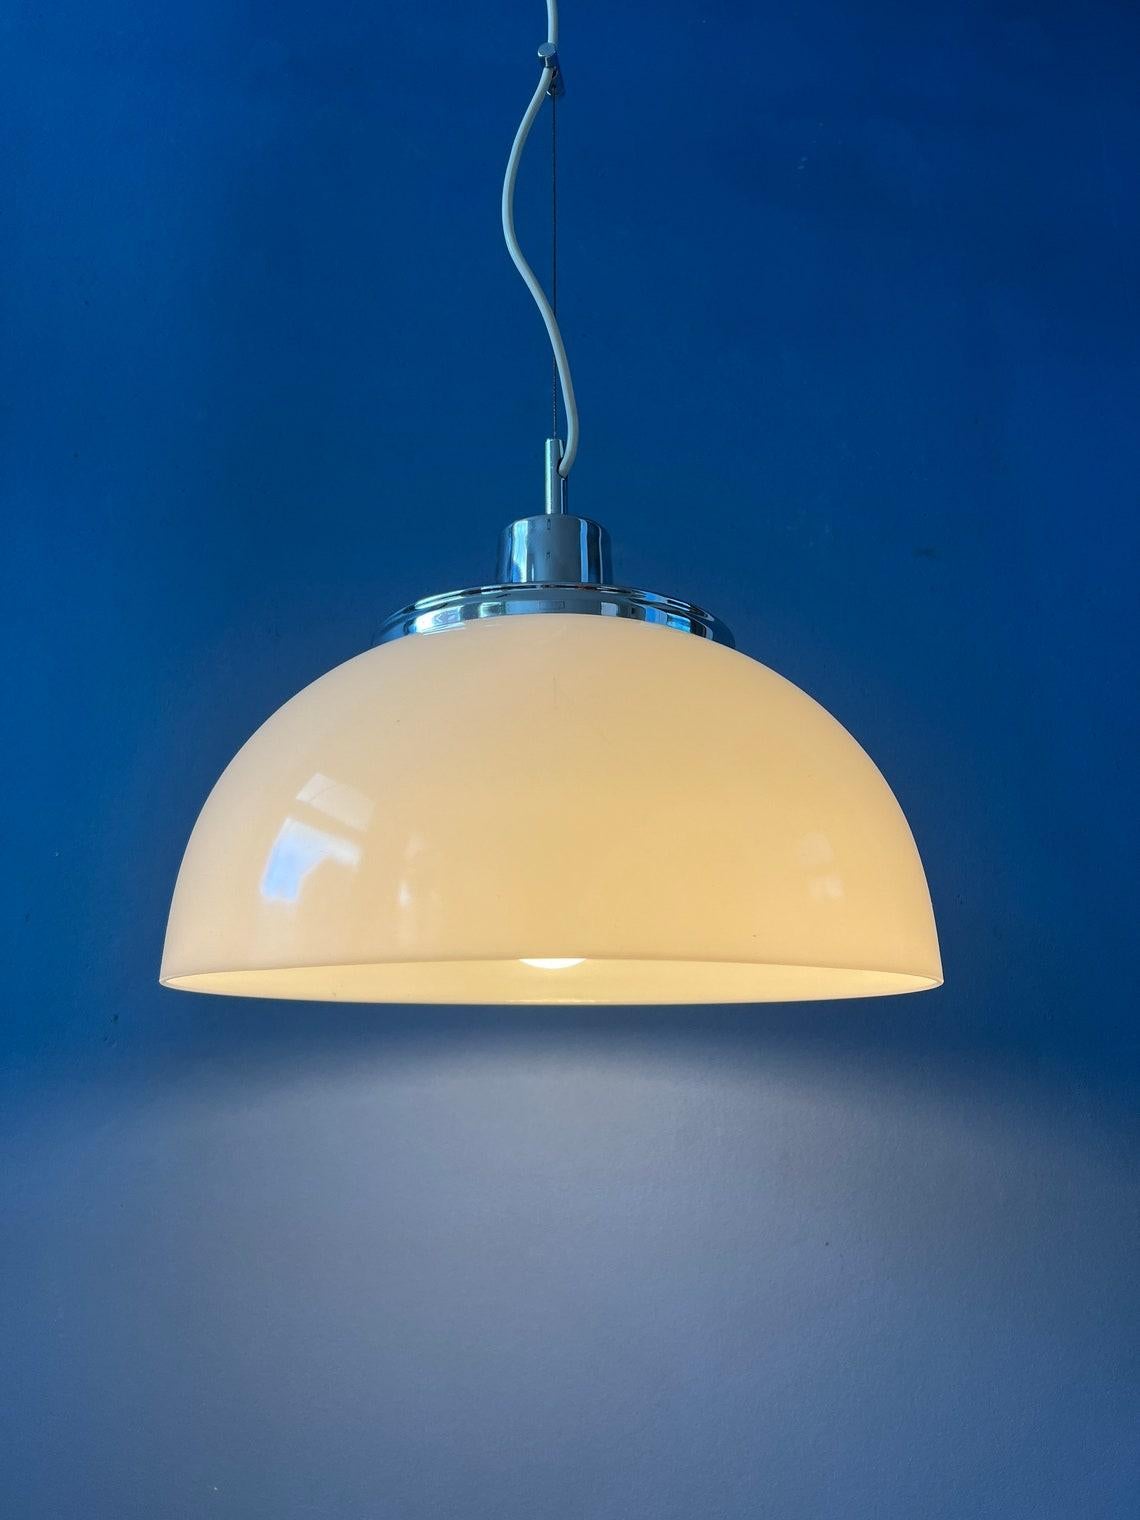 Classic Guzzini 'Faro' acrylic glass pendant lamp. The white shade is made of acrylic glass and produces a magnificent light. The suspension mechanism lets you adjust the height easily. The lamp requires one E27/26 lightbulb.

Additional